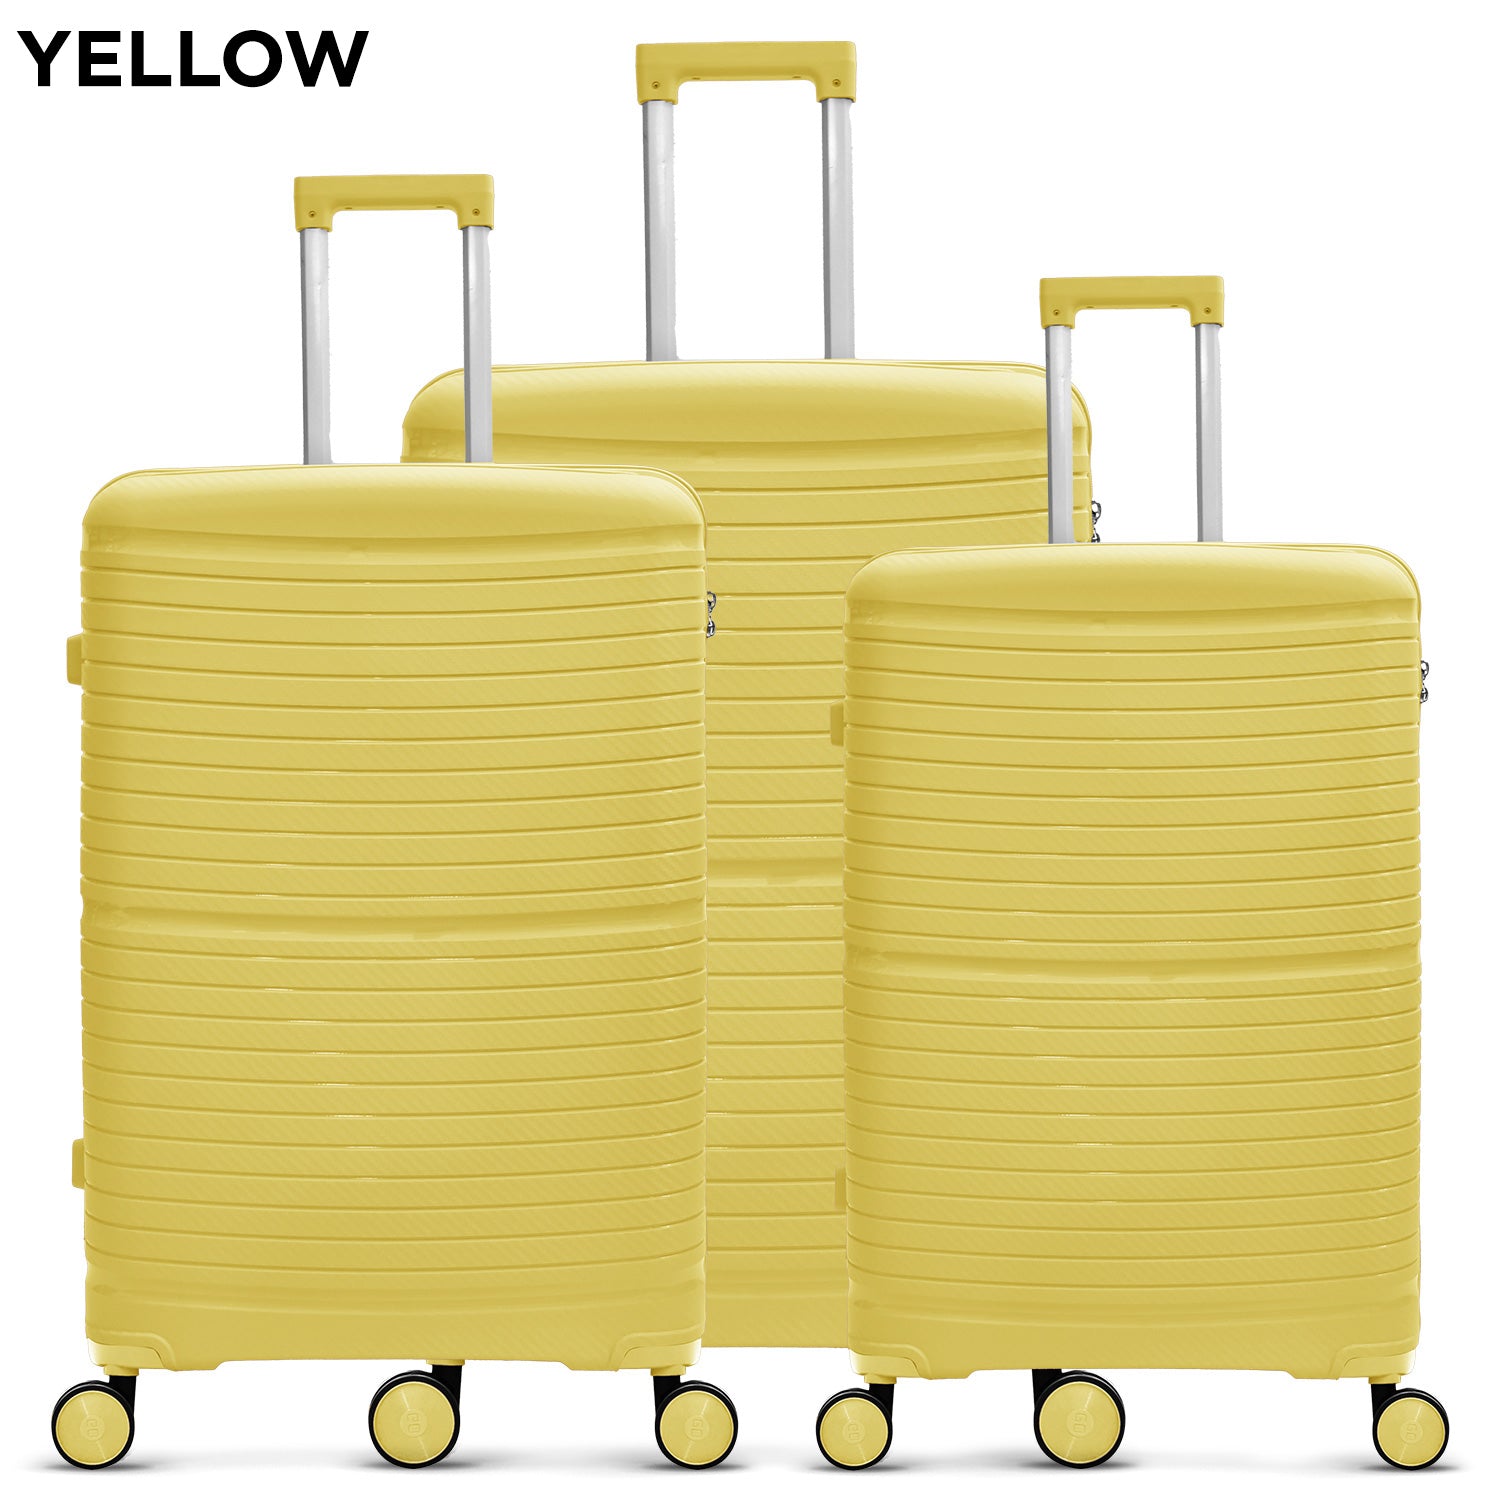 TP COOLIFE LINEAR SPINNER PP 3PC SET PP LUGGAGE (20/24/28")